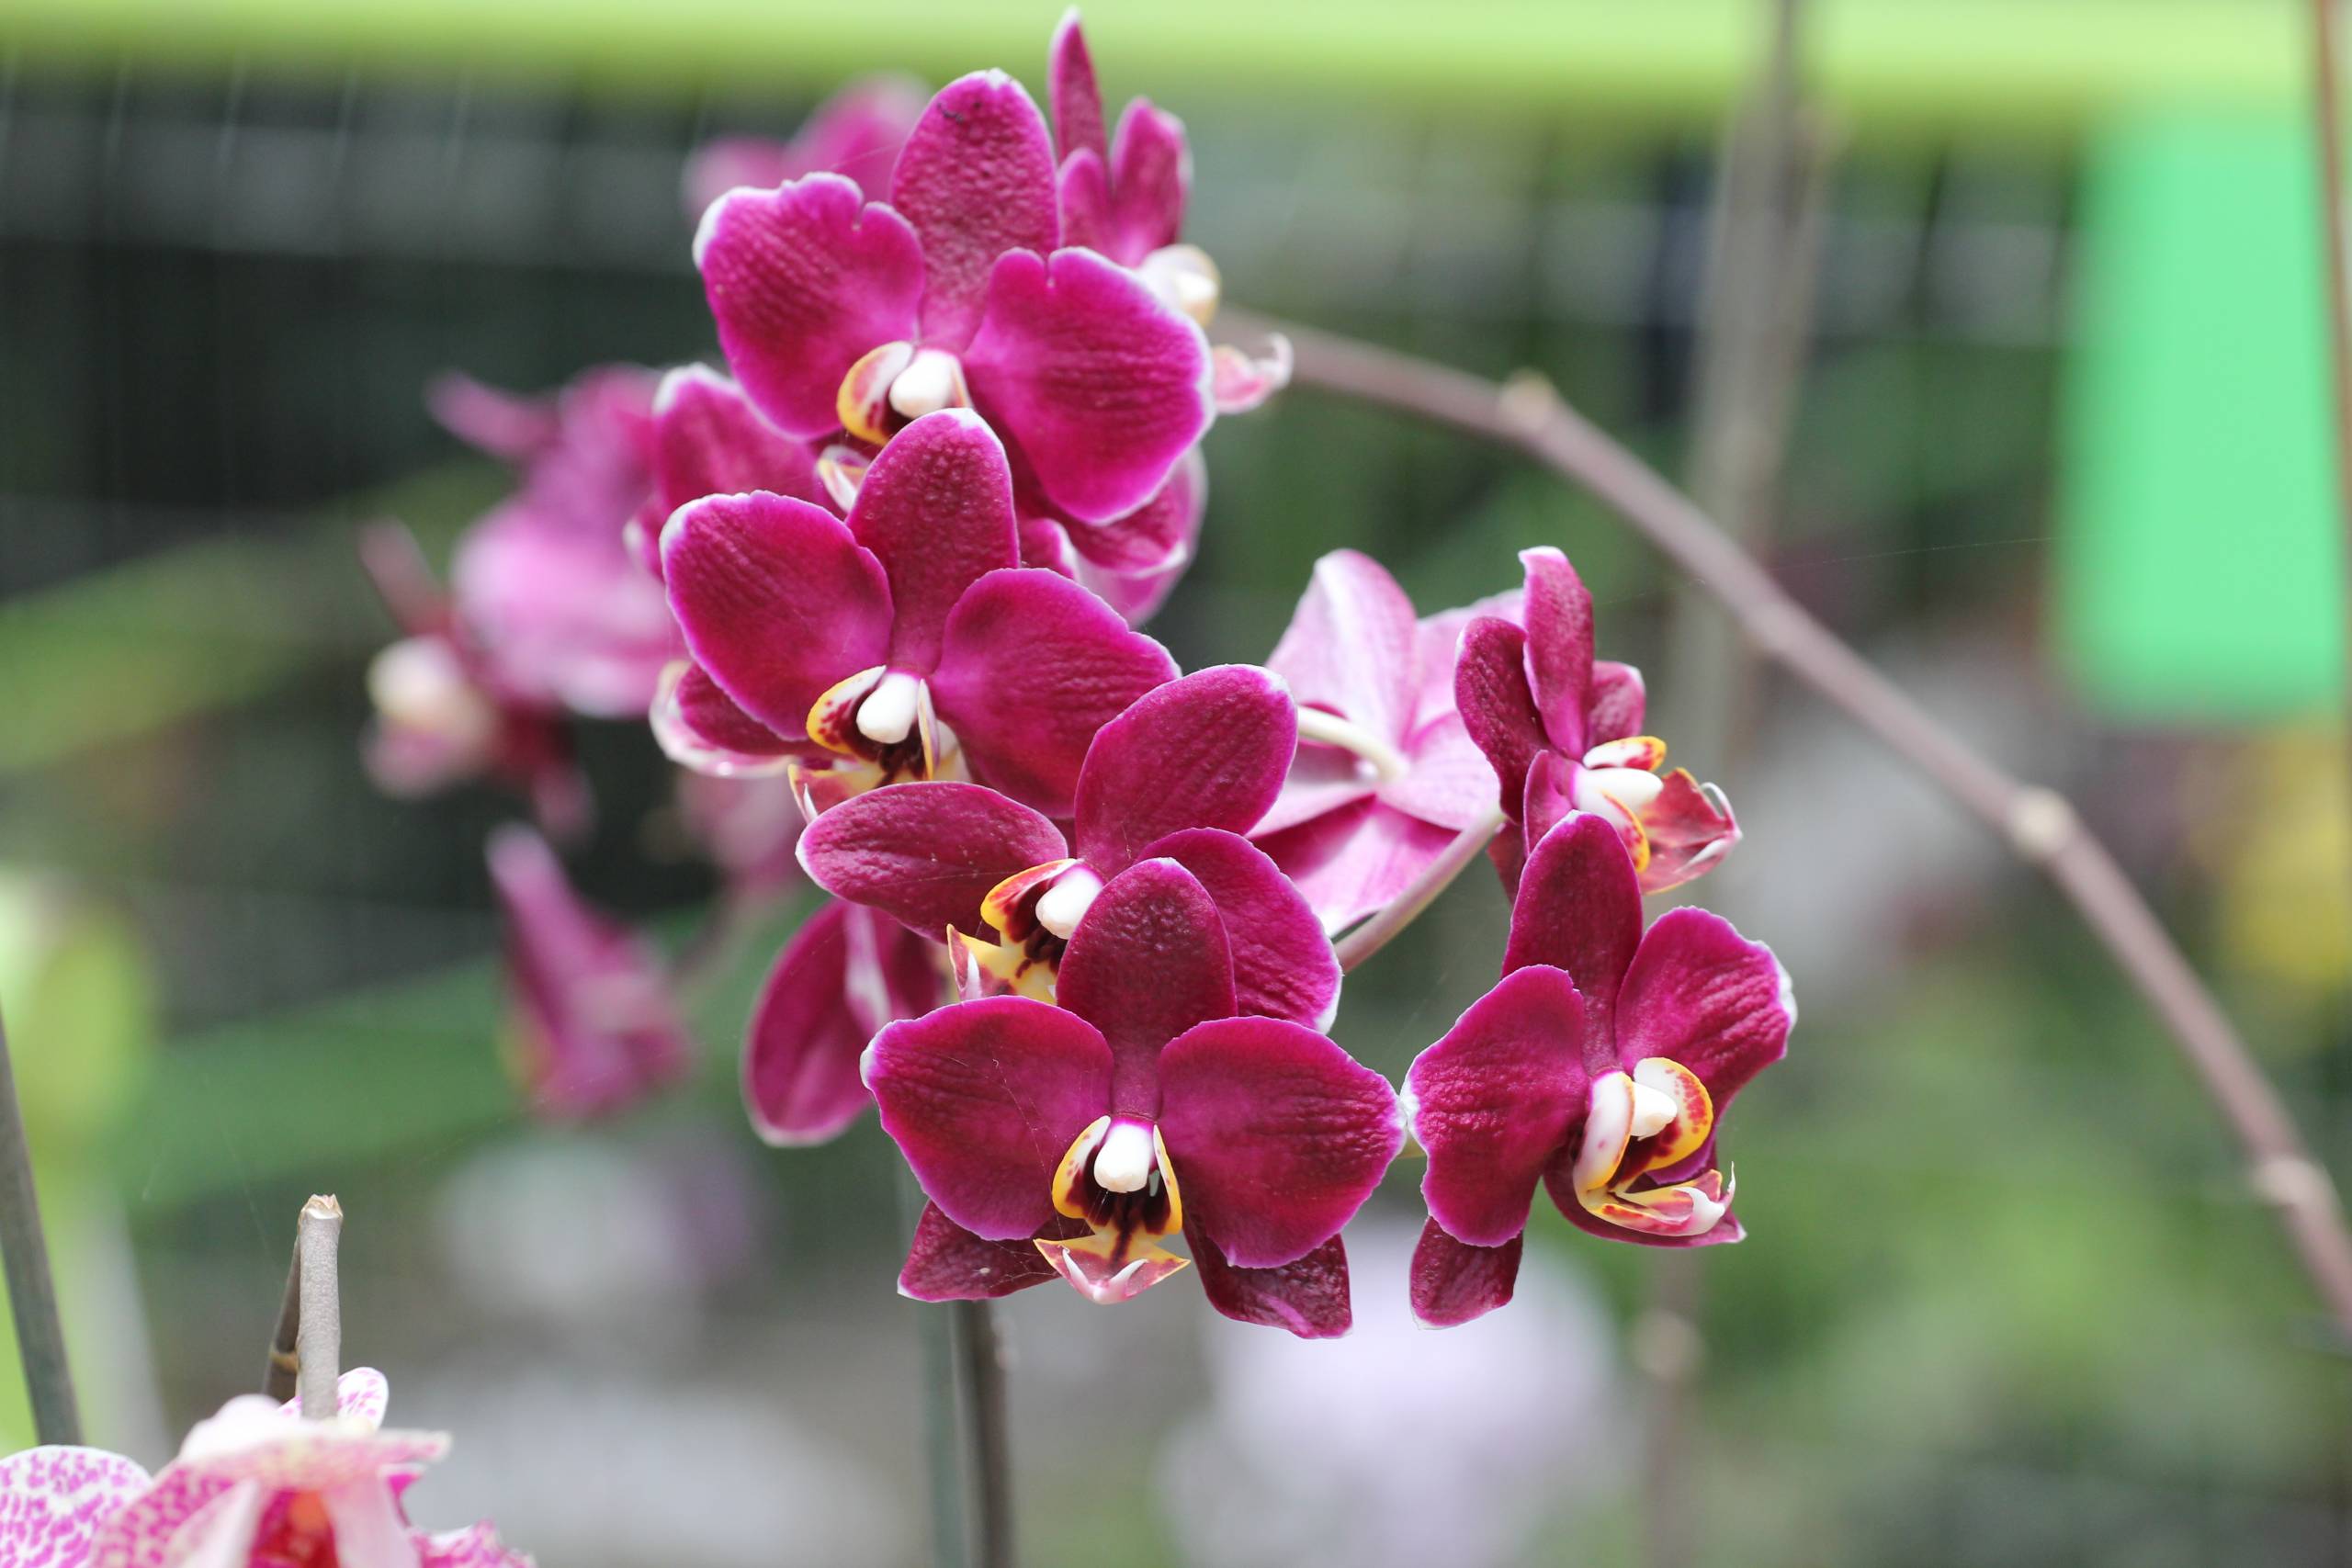 Discover the Enchanting World of Orchids at OrchidSociety.com!